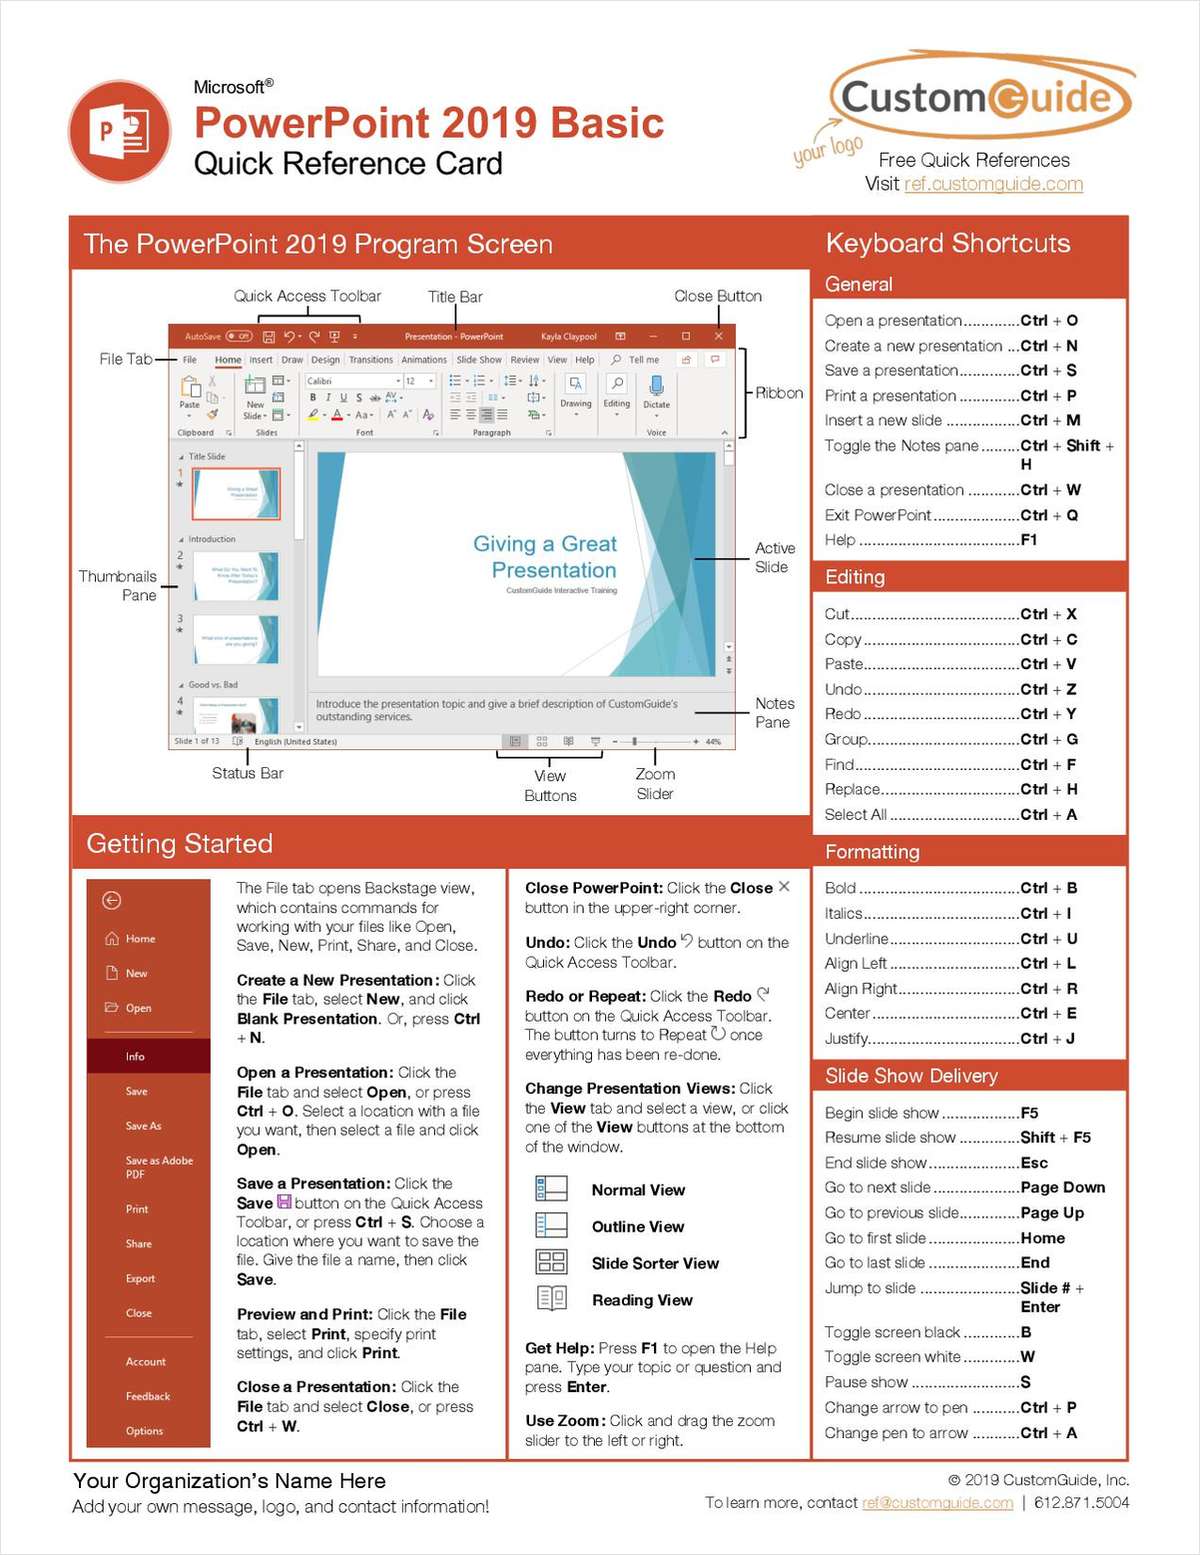 Microsoft PowerPoint 2019 Basic - Quick Reference Card